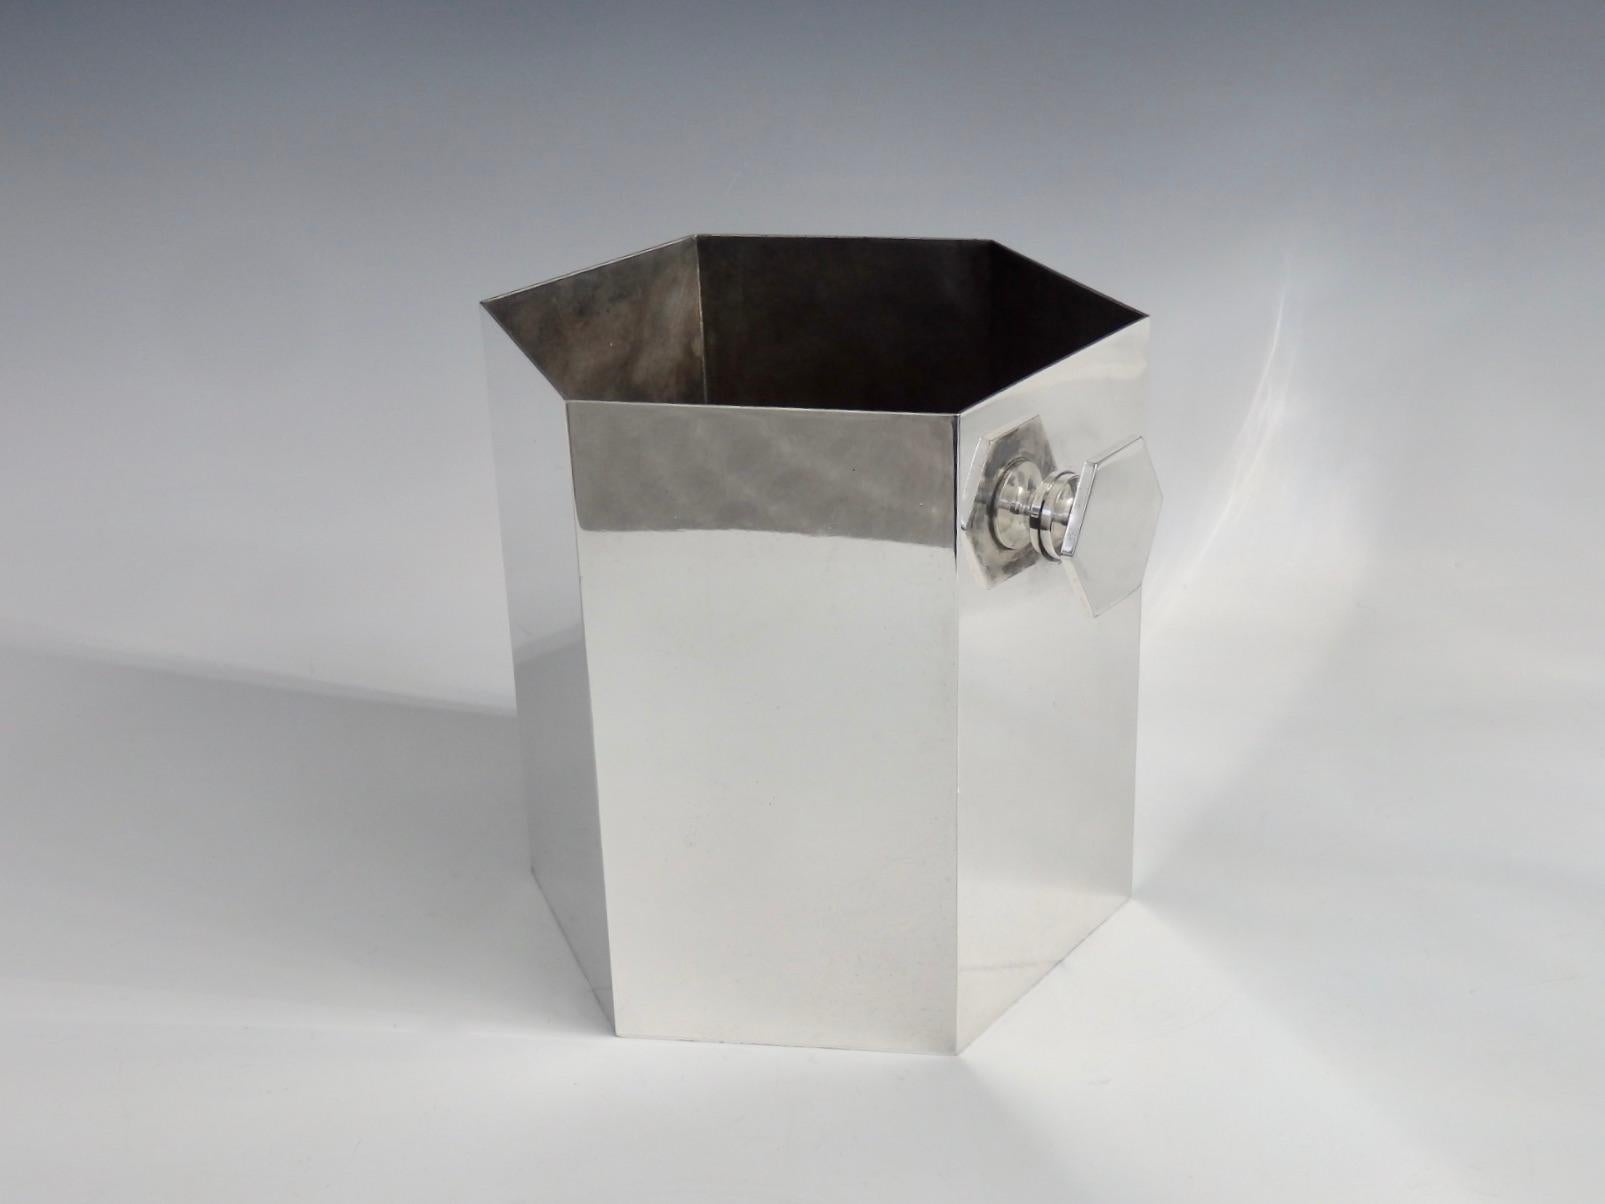 Hand-Crafted Art Deco Era Silver Plate Ice Bucket in Geometric Form with Hexagon Handles